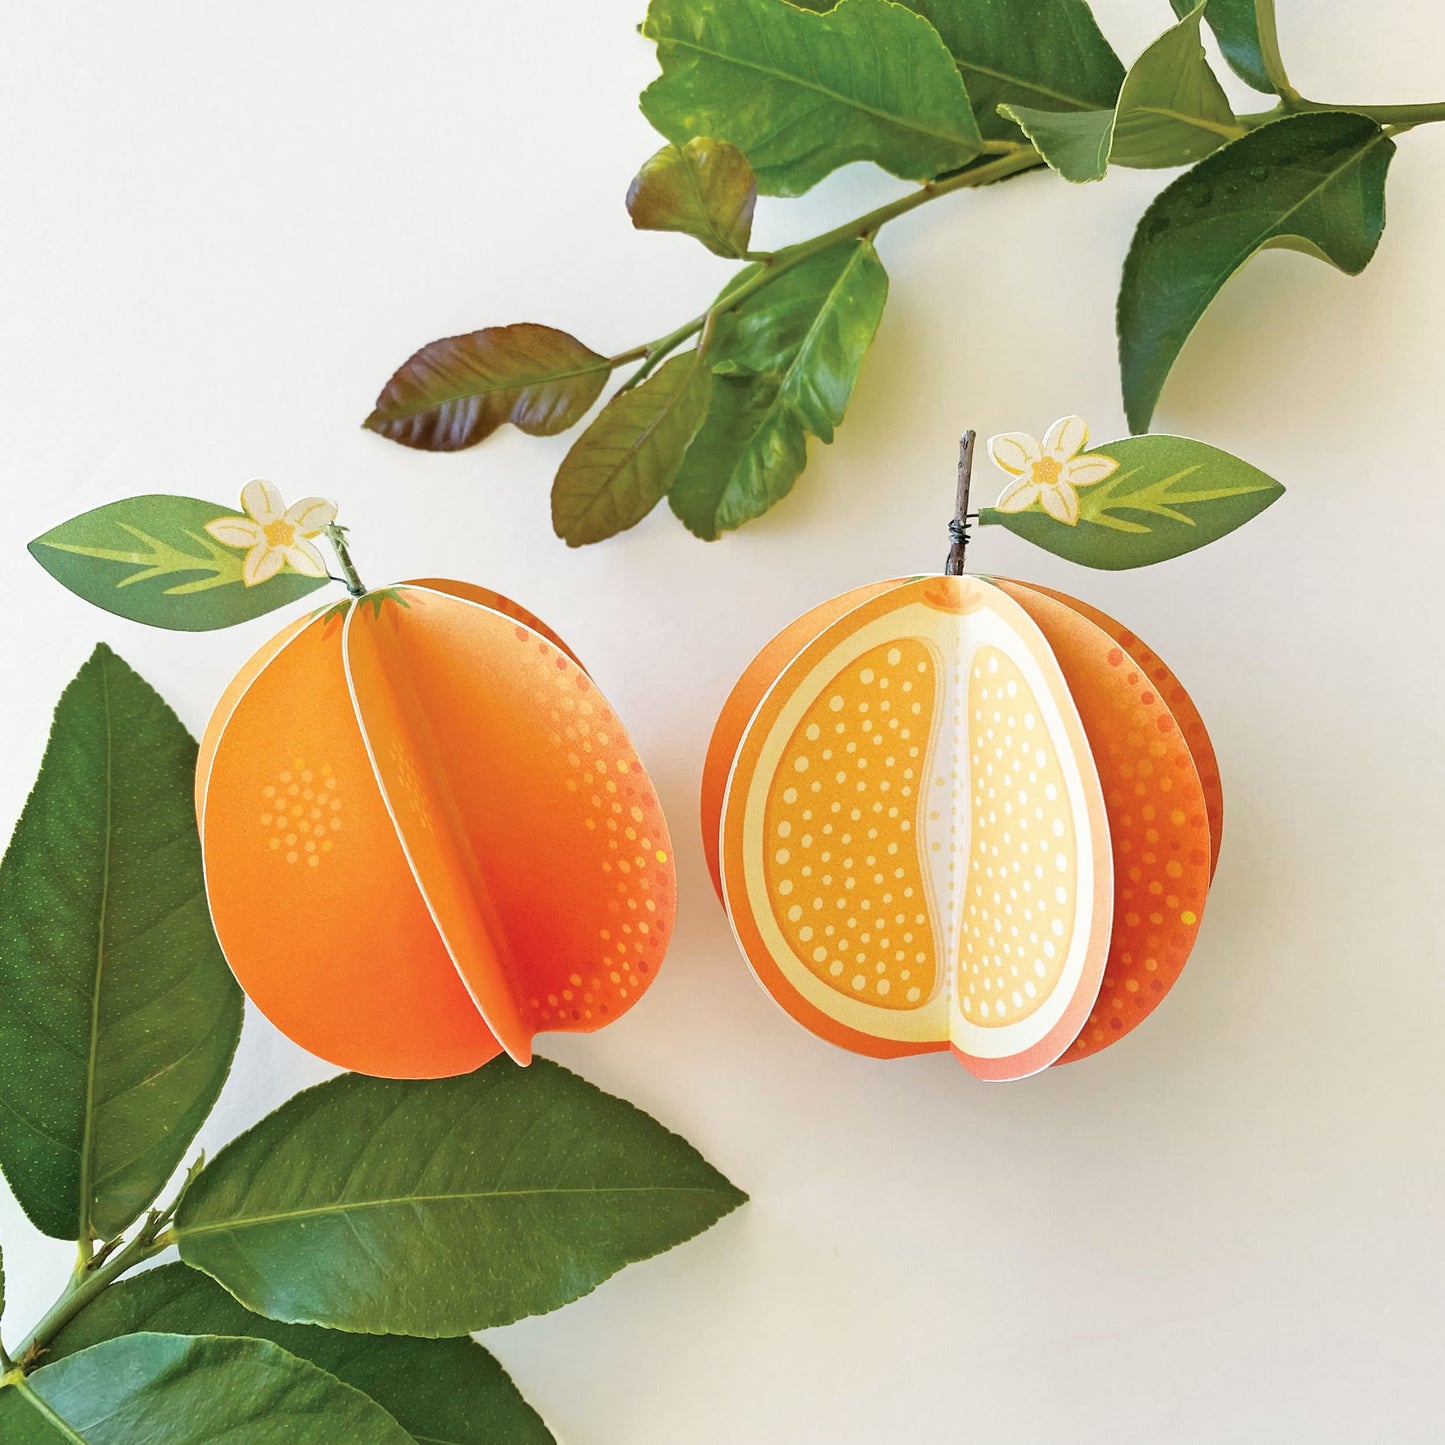 a set of 2 paper oranges, one whole and one cut, shown with citrus leaves